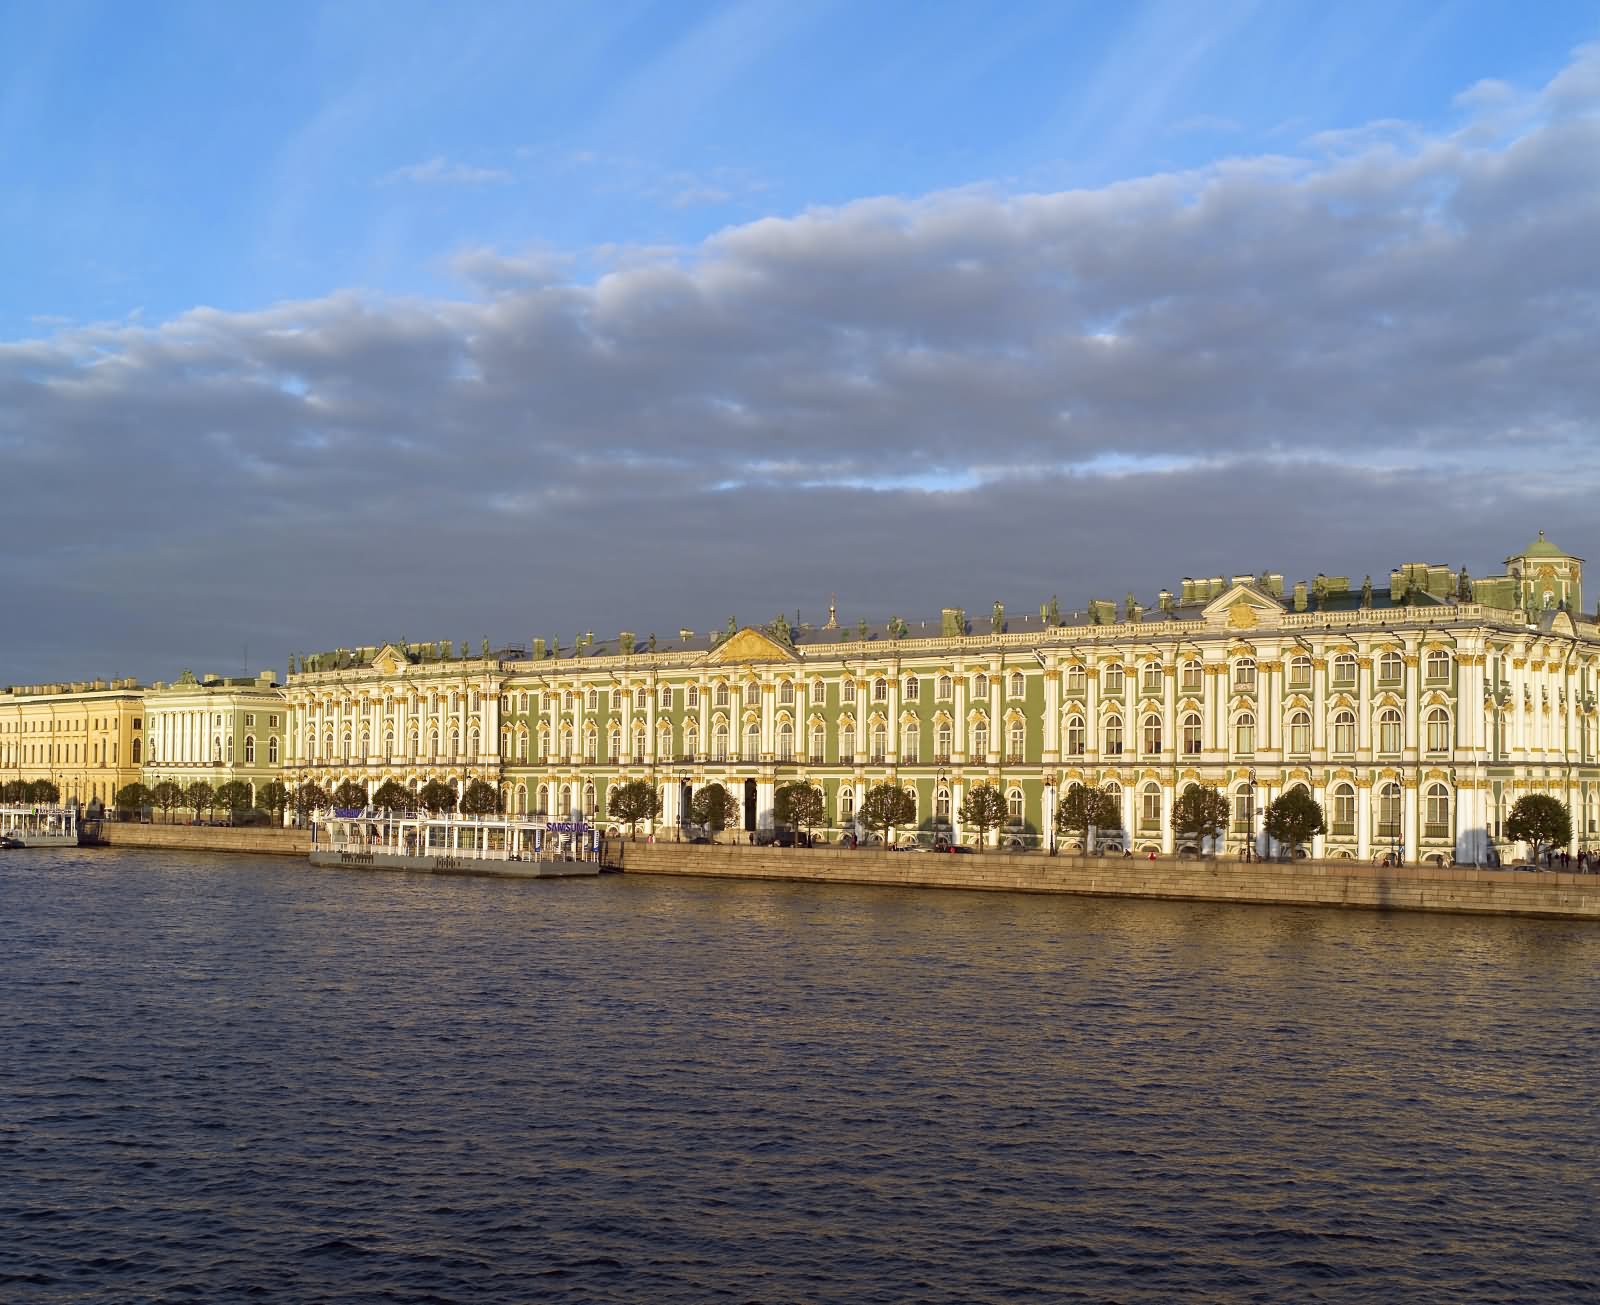 Adorable View Of The Hermitage Museum In St. Petersburg, Russia